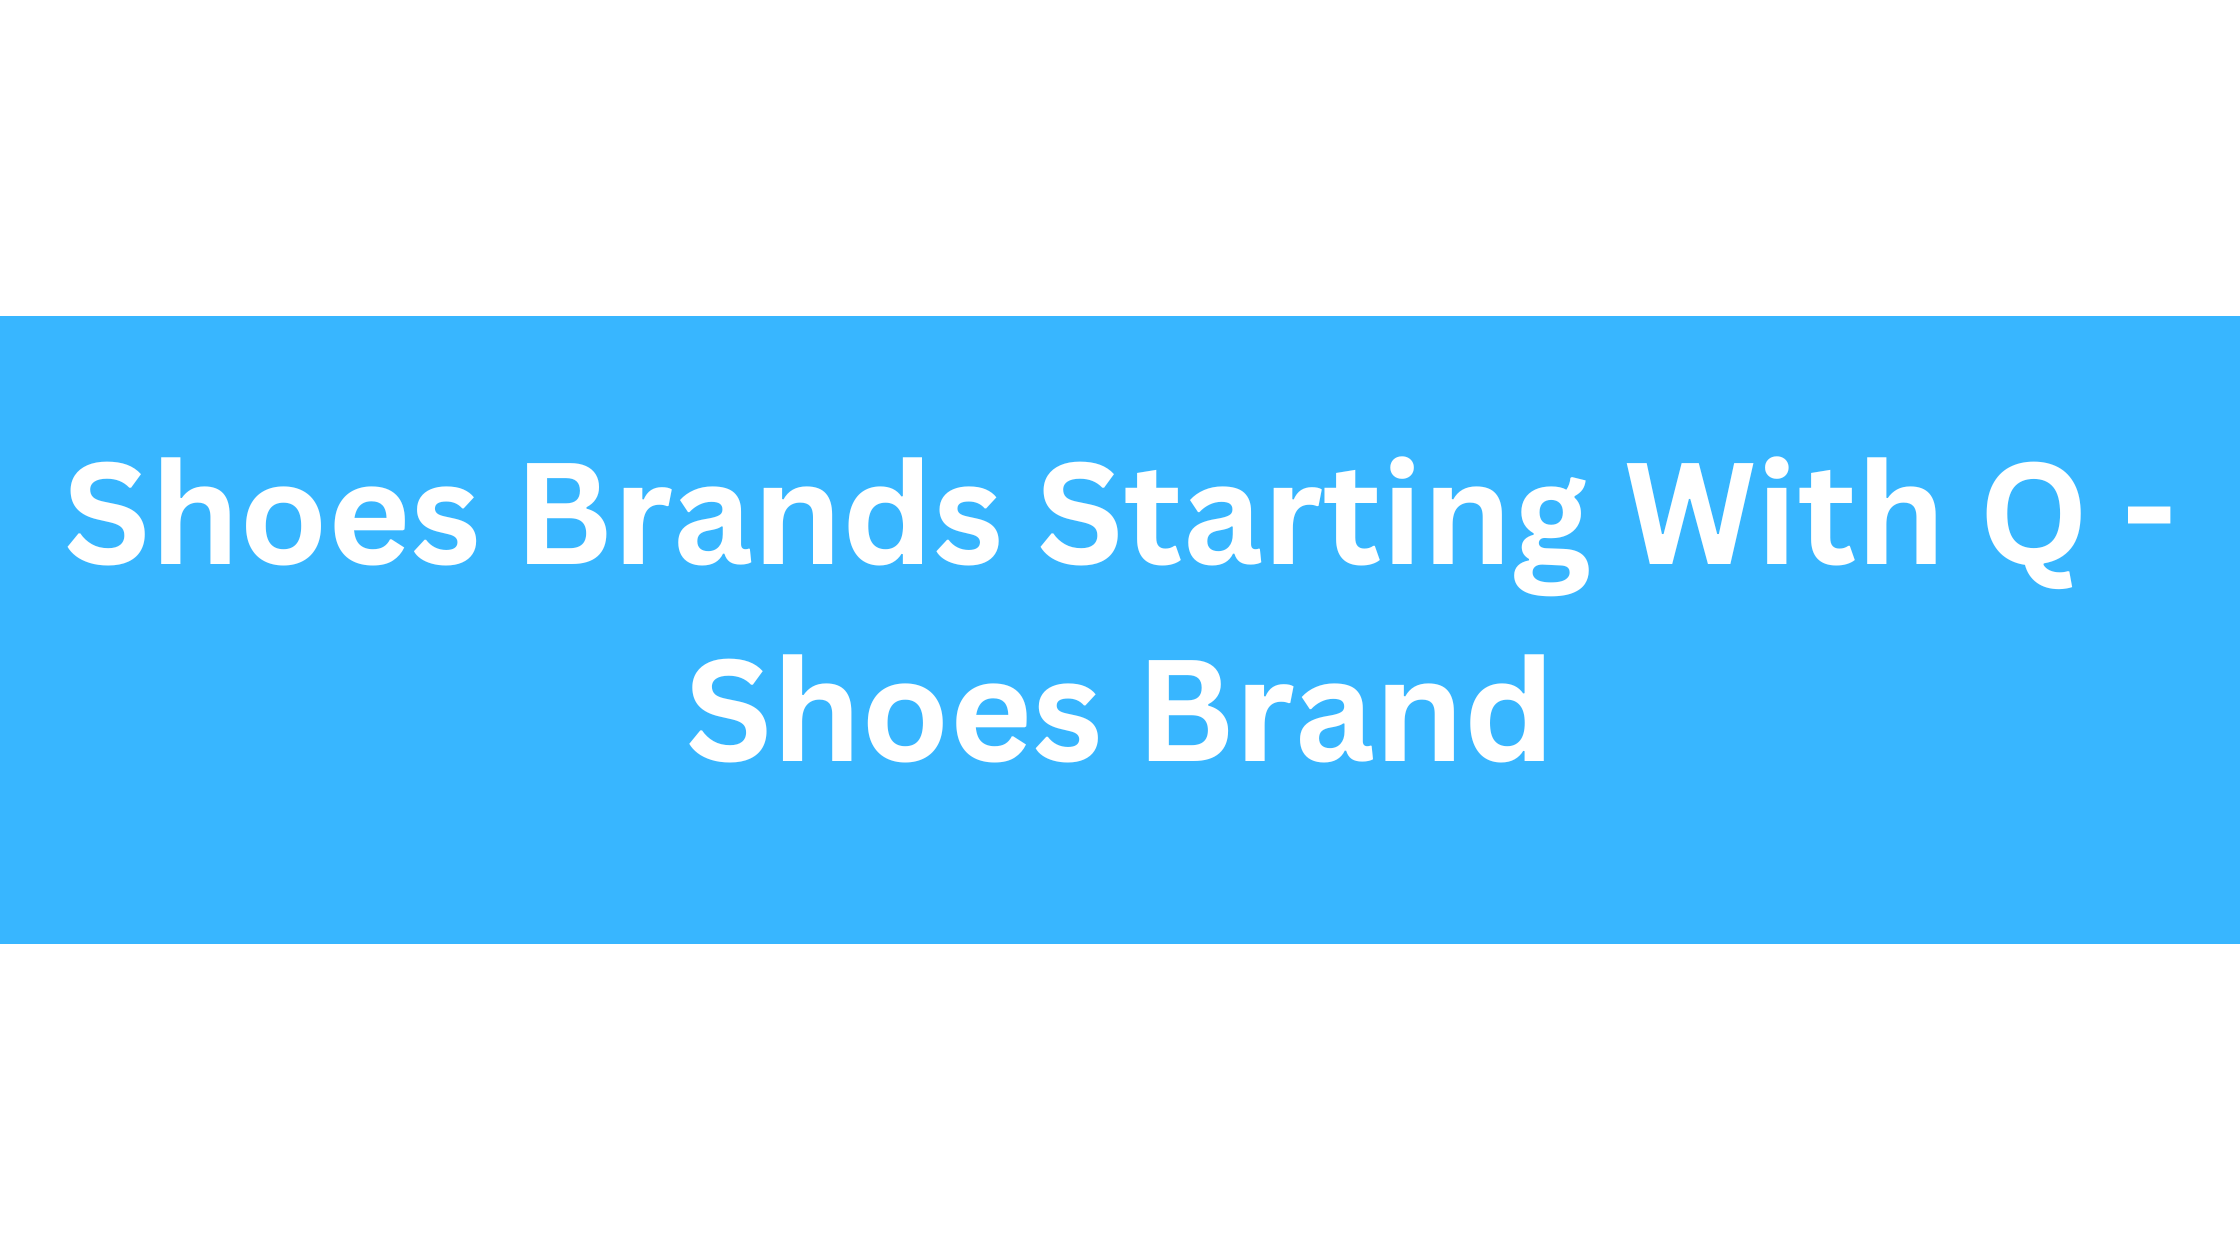 Shoes Brands Starting With Q